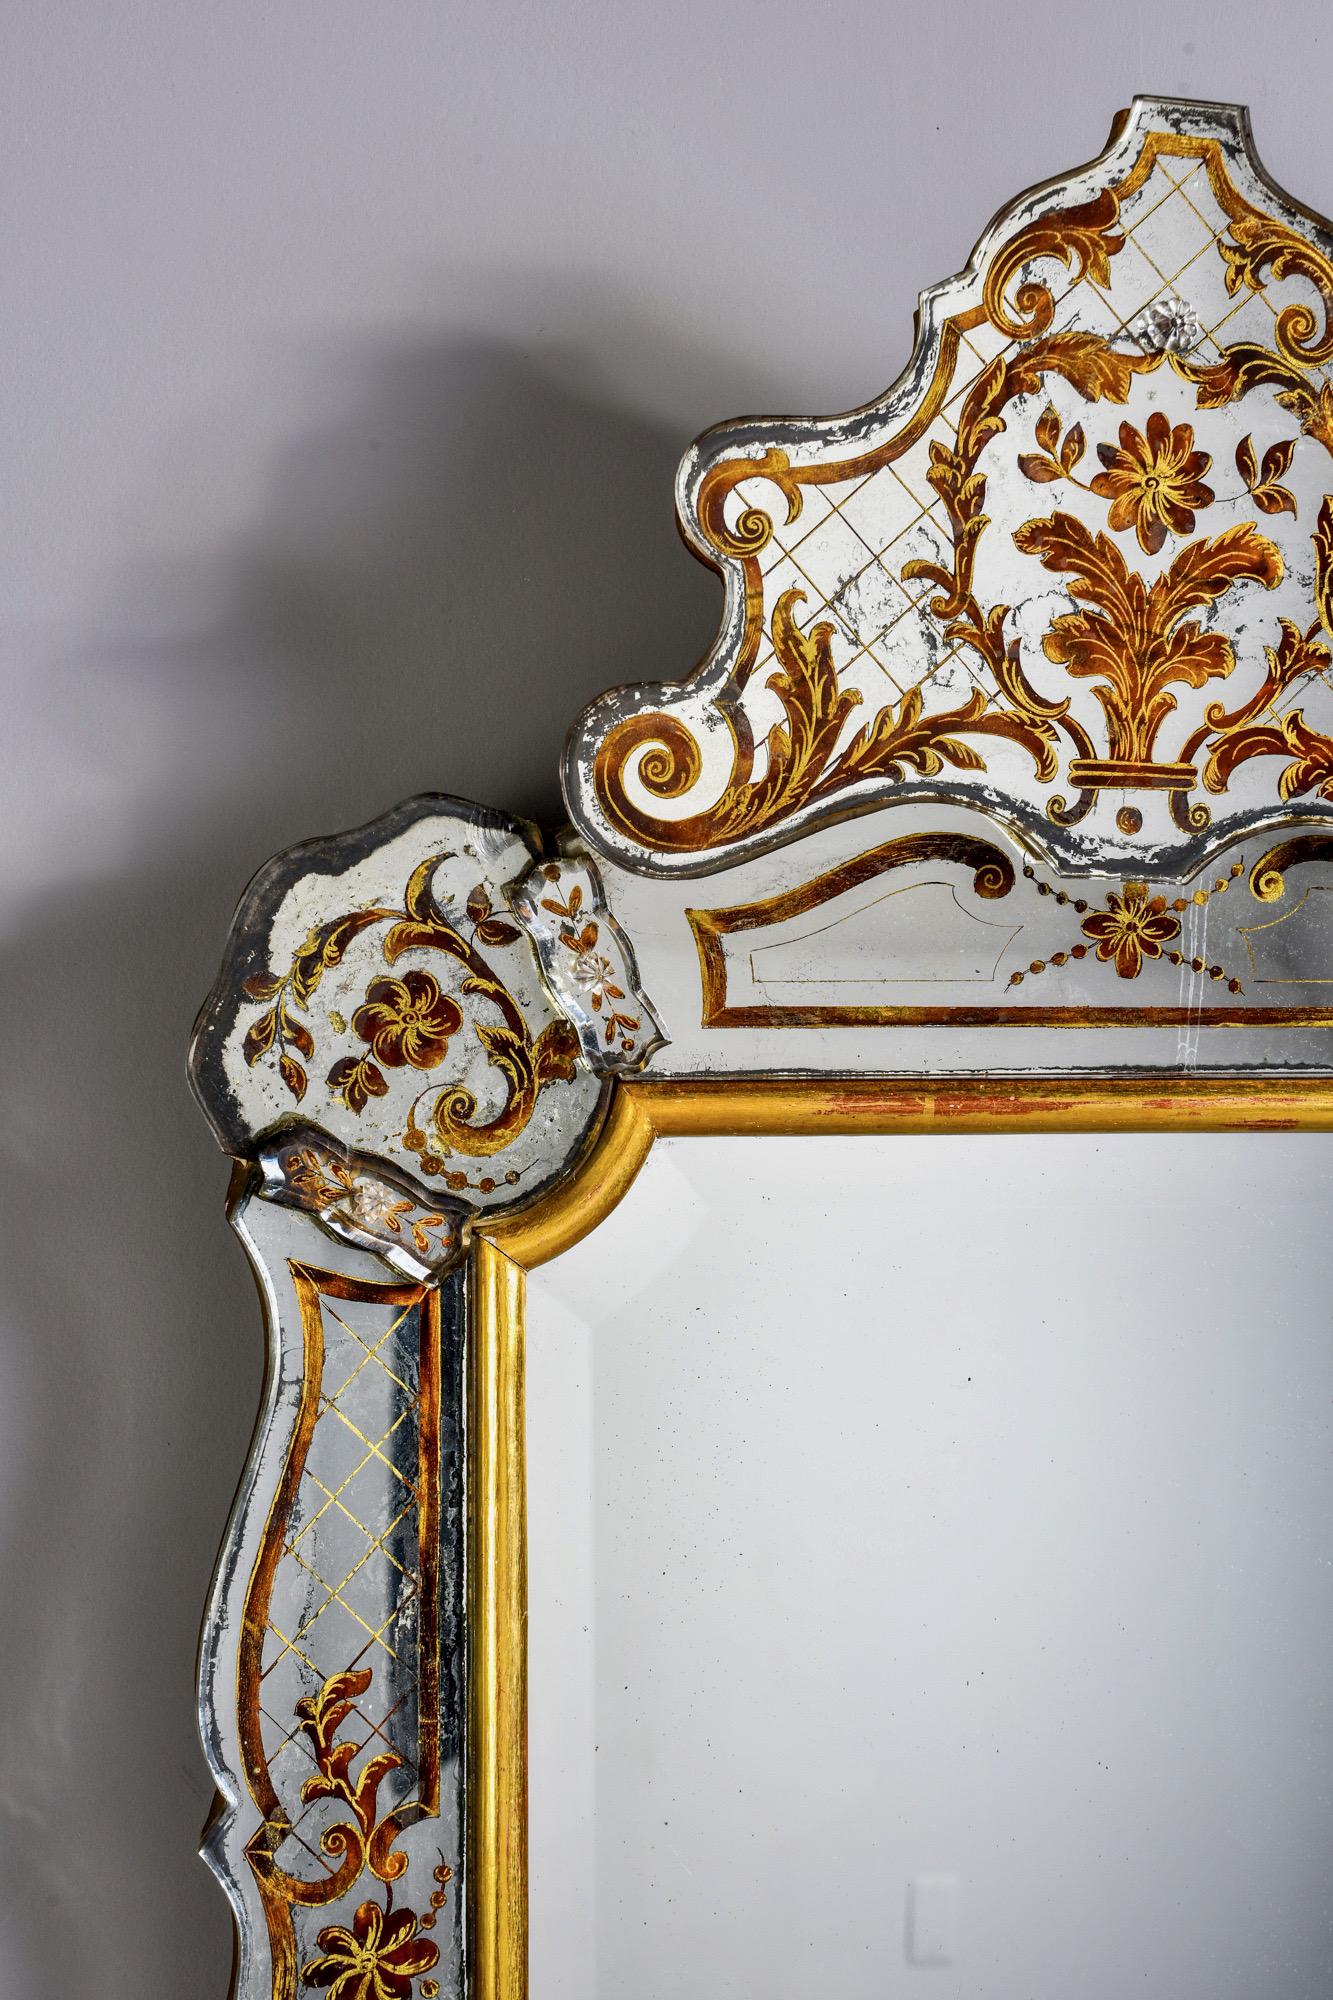 Italian Venetian style crested mirror with reverse gilt painted details, circa 1940s. Unknown maker.